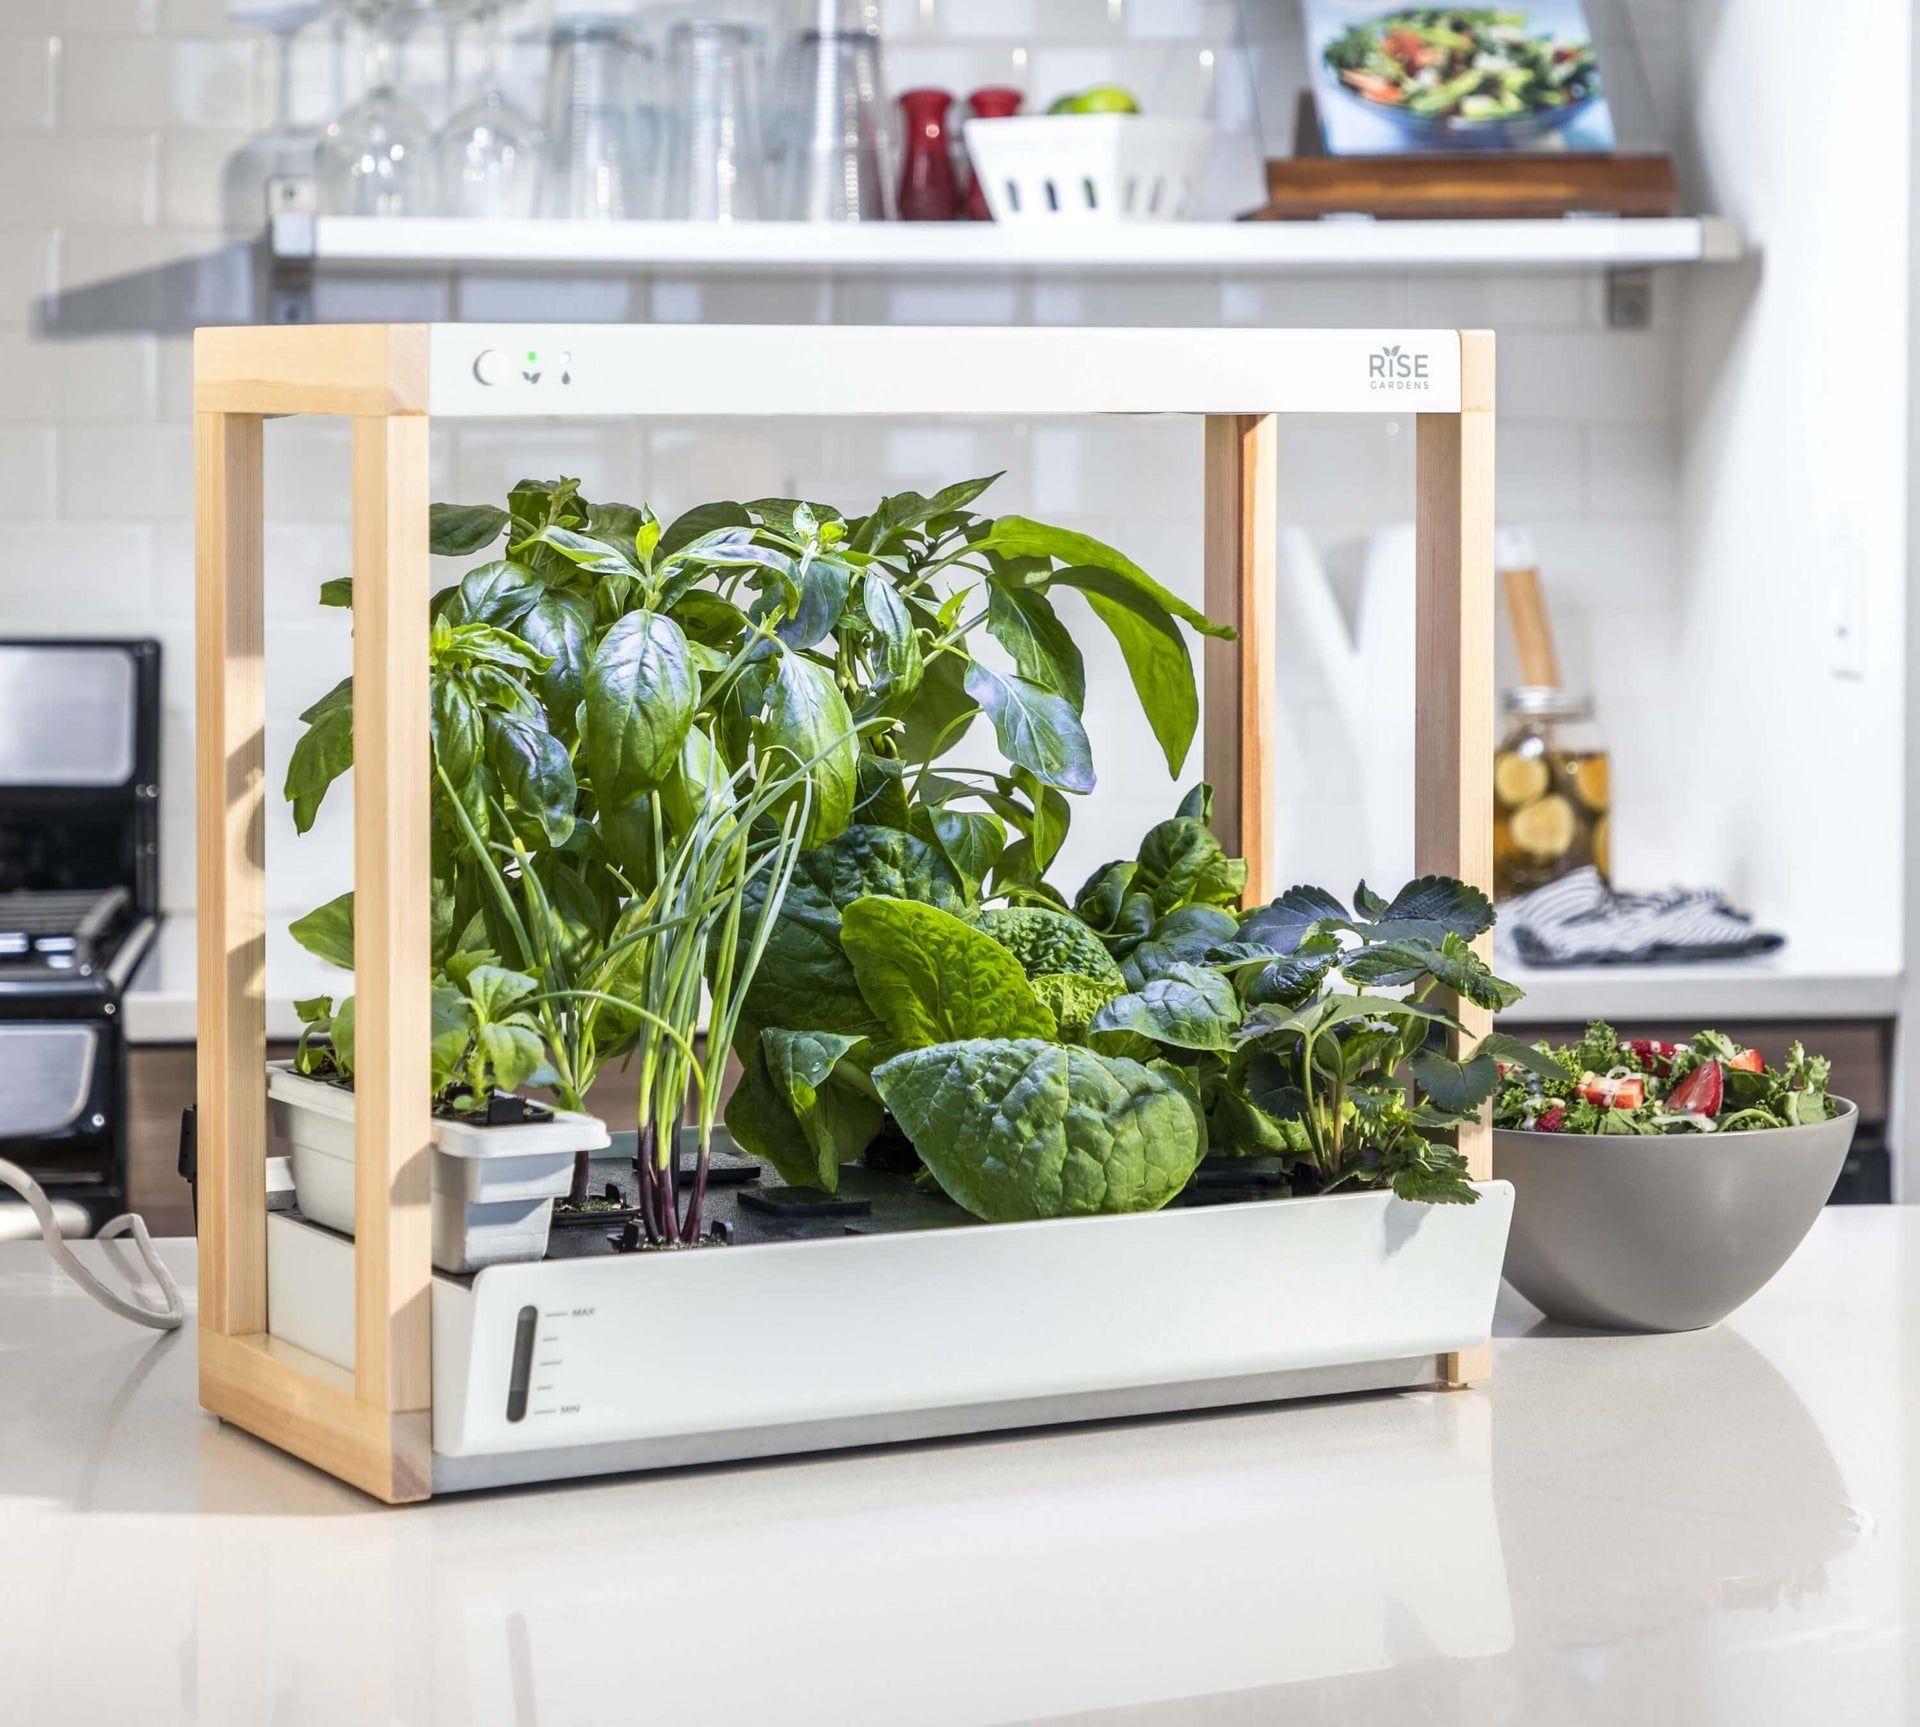 https://pyxis.nymag.com/v1/imgs/519/342/ab25446cffef70ce0ee4d2ac78bea40a1a-personal-garden.jpg